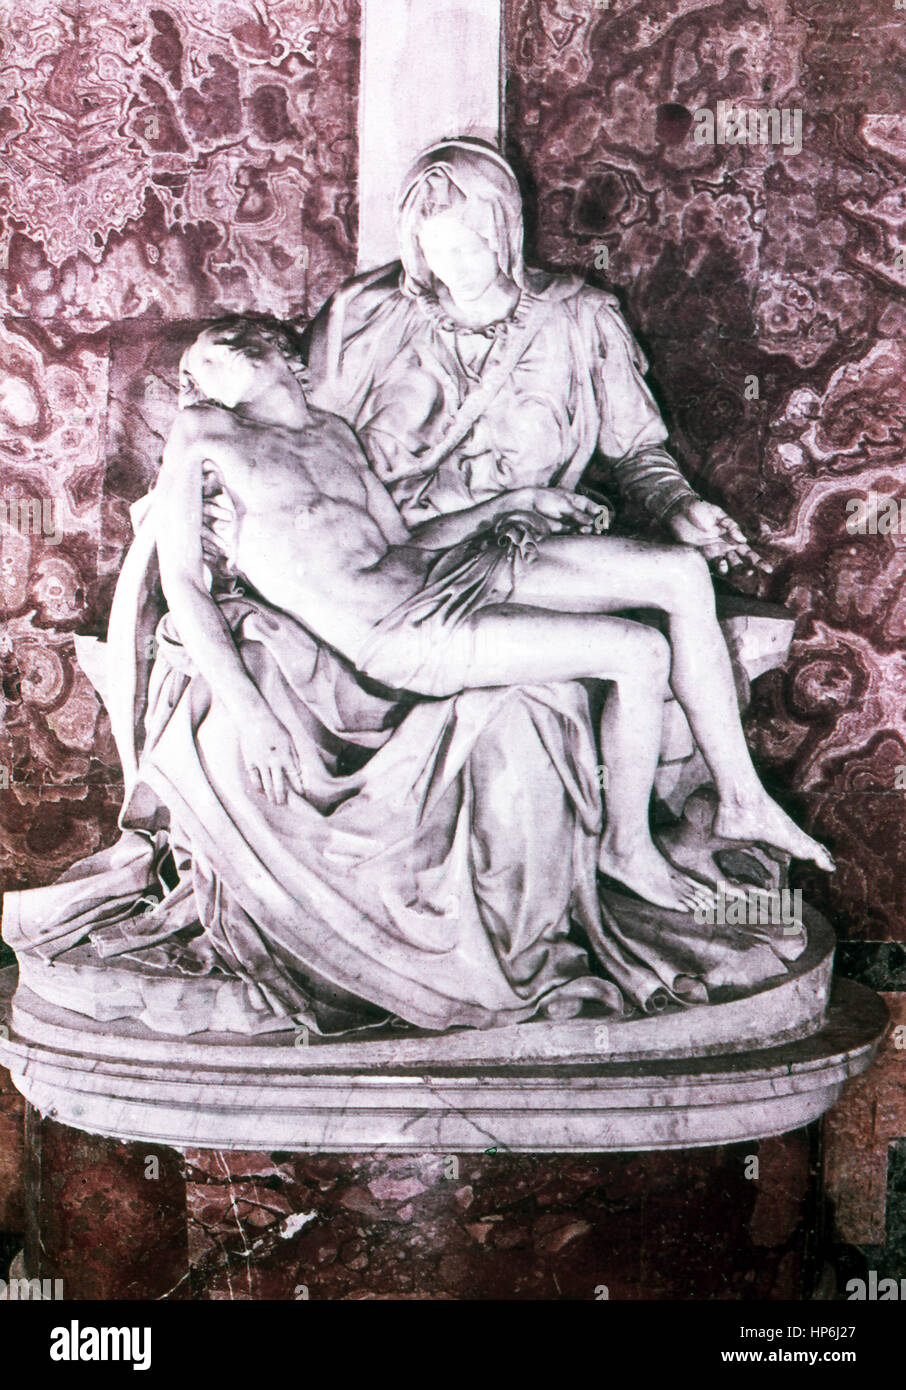 This sculpture by the Italian sculptor painter Michelangelo (1475-1564) is titled Pieta. The Italian sculptor, painter, and architect Michelangelo carved Christ lying in the arms of his mother Mary just after the crucifixion. One of his two best known works (the other is David), it was completed in 1499. It is now housed in the Vatican Museum. The photo dates to 1964. Stock Photo